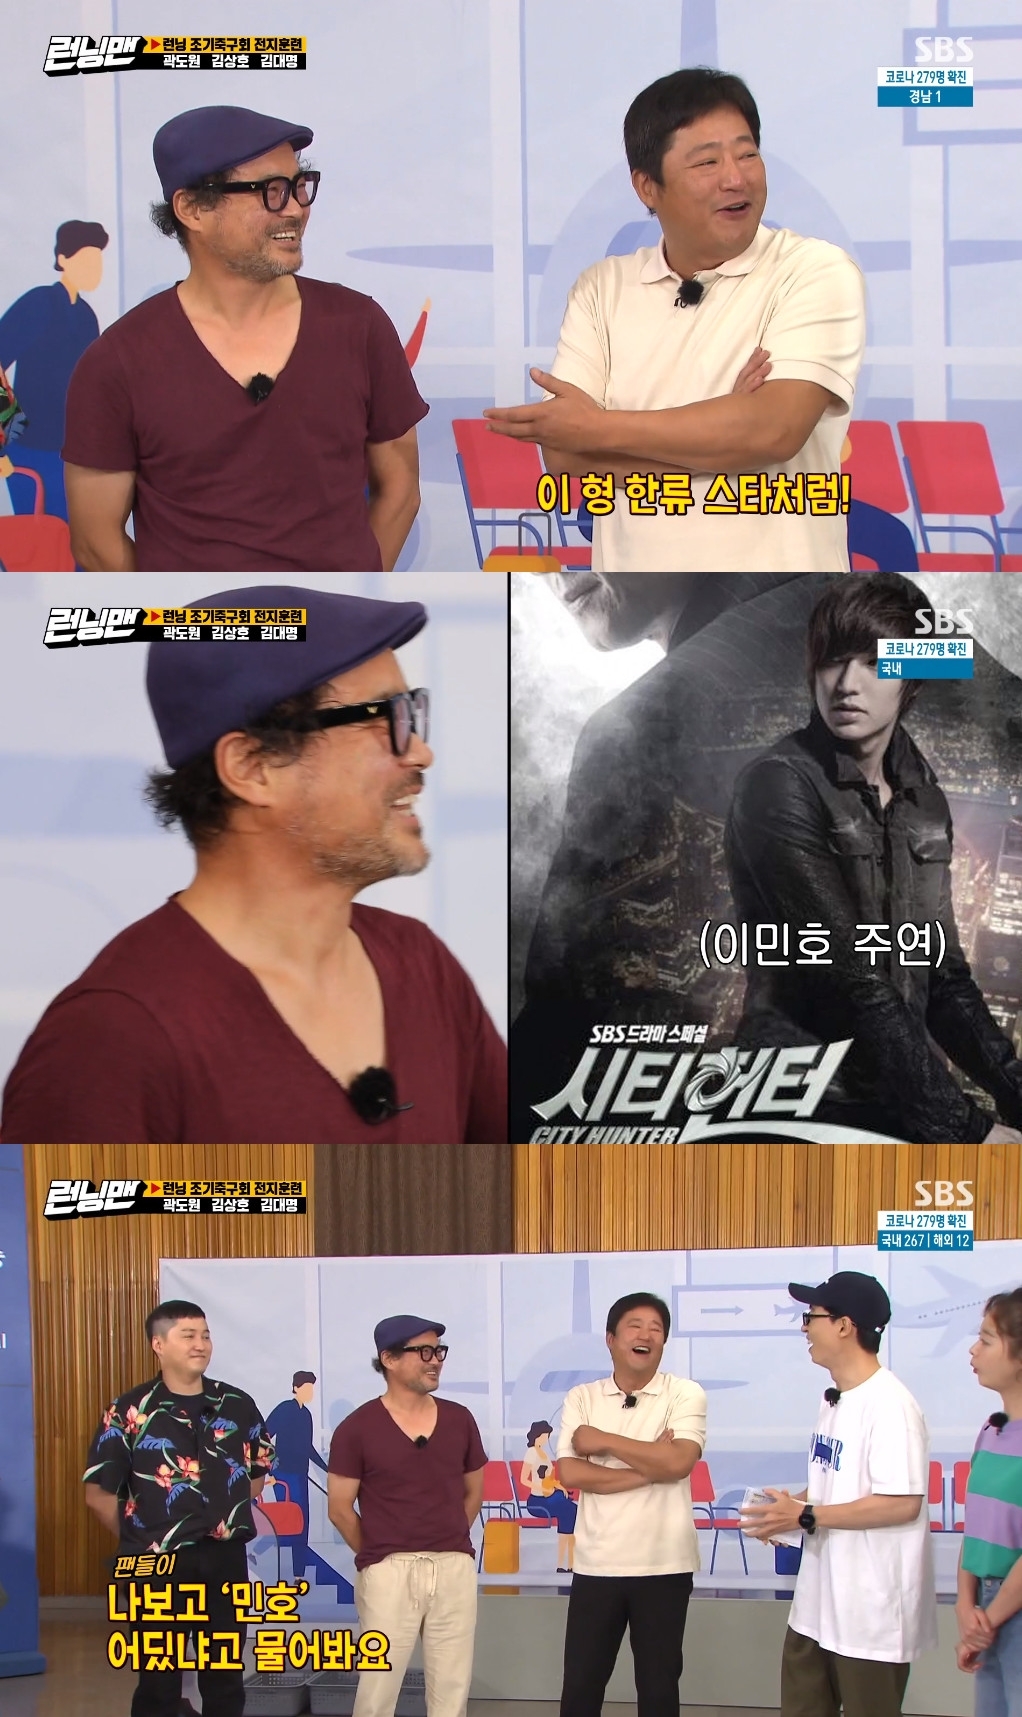 Seoul) = Running Man Kim Sang-ho mentioned Hallyu star Lee Min-ho.On SBS Running Man broadcasted on the afternoon of the 16th, Kwak Do-won, Kim Dae-myeong, Kim Sang-ho, who appeared in International Susa appeared.Kwak Do-won said, I came to promote international Susa. He said, Ill tell you in advance, but I have been shooting all night and my neck has tasted a lot.Currently, he confessed that he was filming the movie Firefighter, and Lee Kwang-soo admired promoting four movies in 20 seconds.Kim Dae-myeong also said that there is a relationship with Lee Kwang-soo and the Drama Sound of the Heart.He said, Did Lee Kwang-soo shake his head? He said, I am remembered as being very polite and good to people. But when I saw Running Man, I was completely different. Kim Jong Kook responded, I am not in my mind here.Kim Sang-ho has a relationship with Lee Kwang-soo as the Drama City Hunter.Kwak Do-won said, The Filipinos who watched the Drama rushed like a Korean star to Kim Sang-ho. Kim Sang-ho replied, I ask where I am (Lee) Minho.